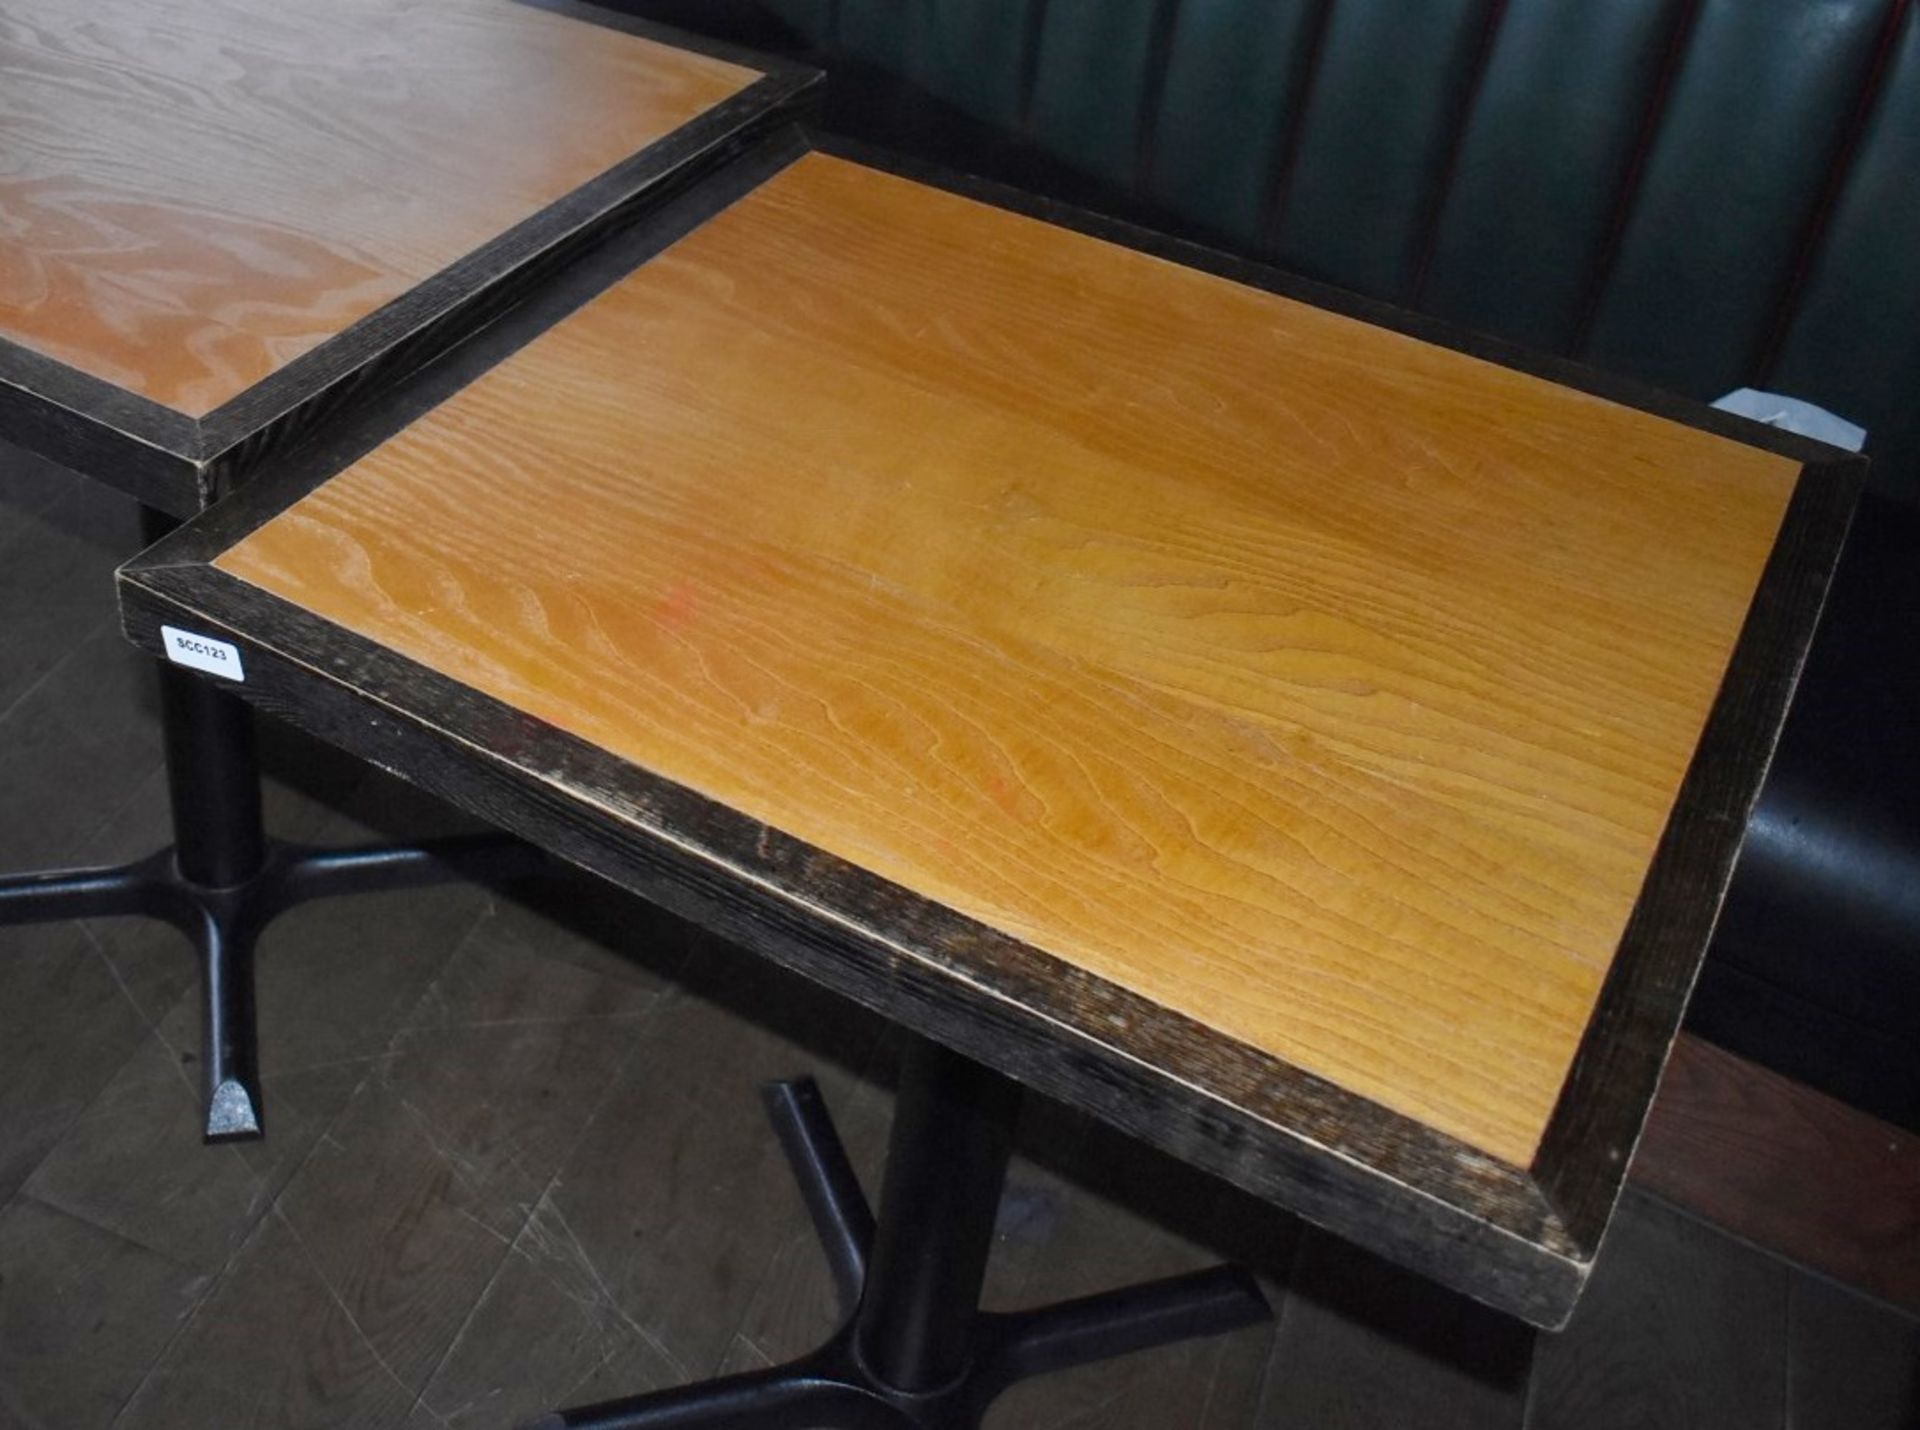 2 x Restaurant Dining Tables - Seats 2 Persons Per Table - Two Tone Wooden Top and Cast Iron Bases - Image 5 of 5